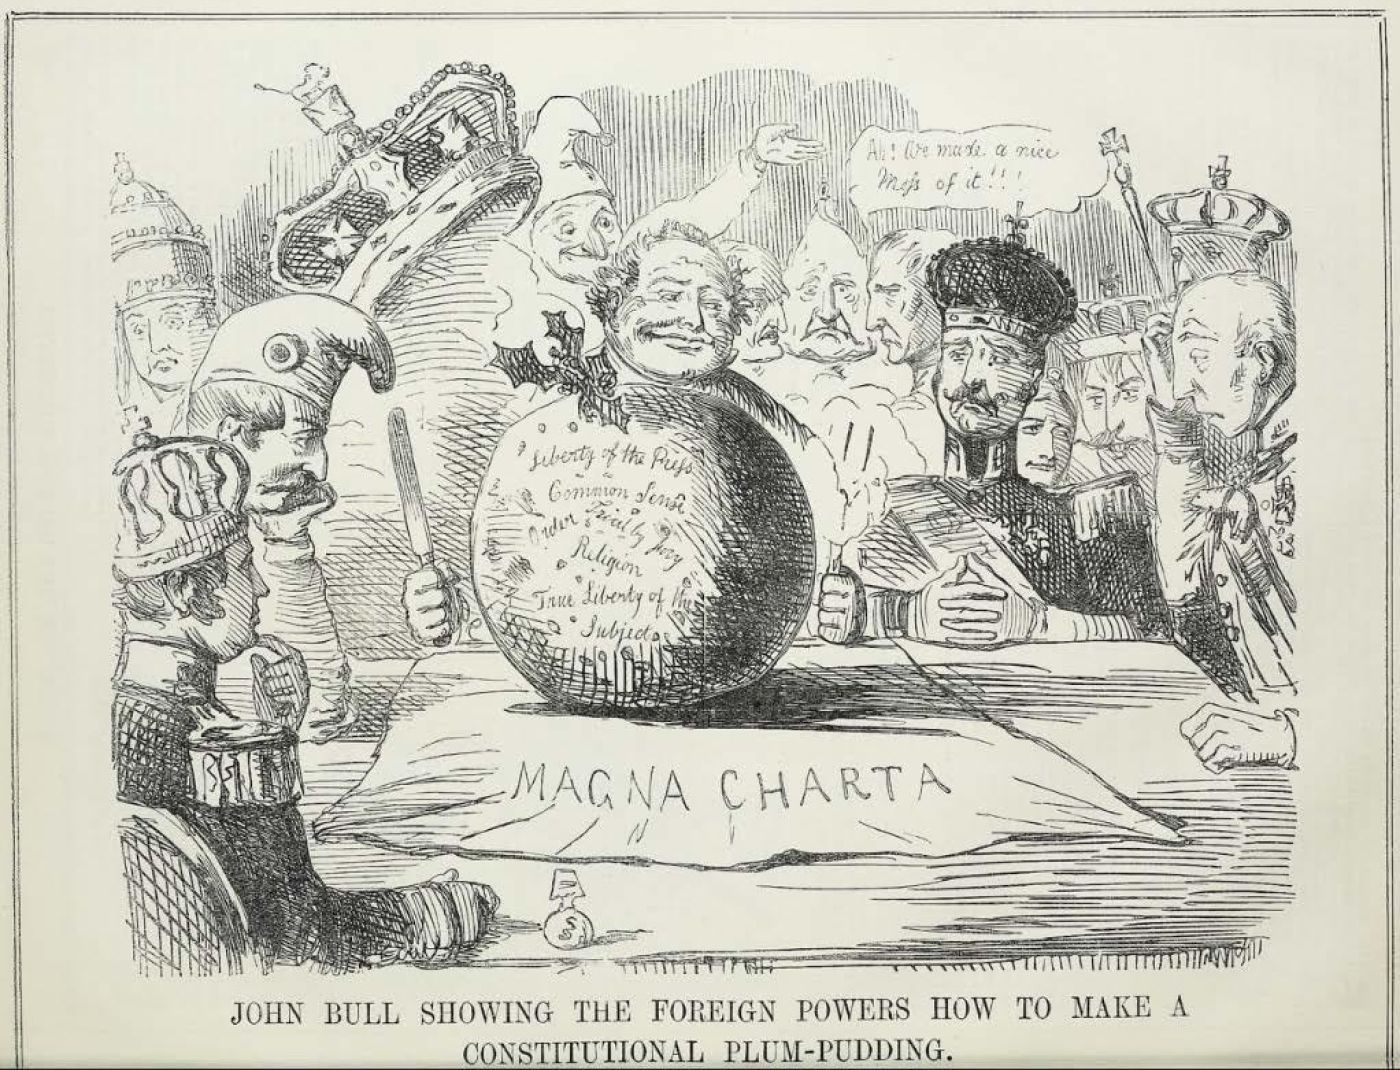 John Bull Showing the Foreign Powers How to Make a Constitutional Plum-Pudding